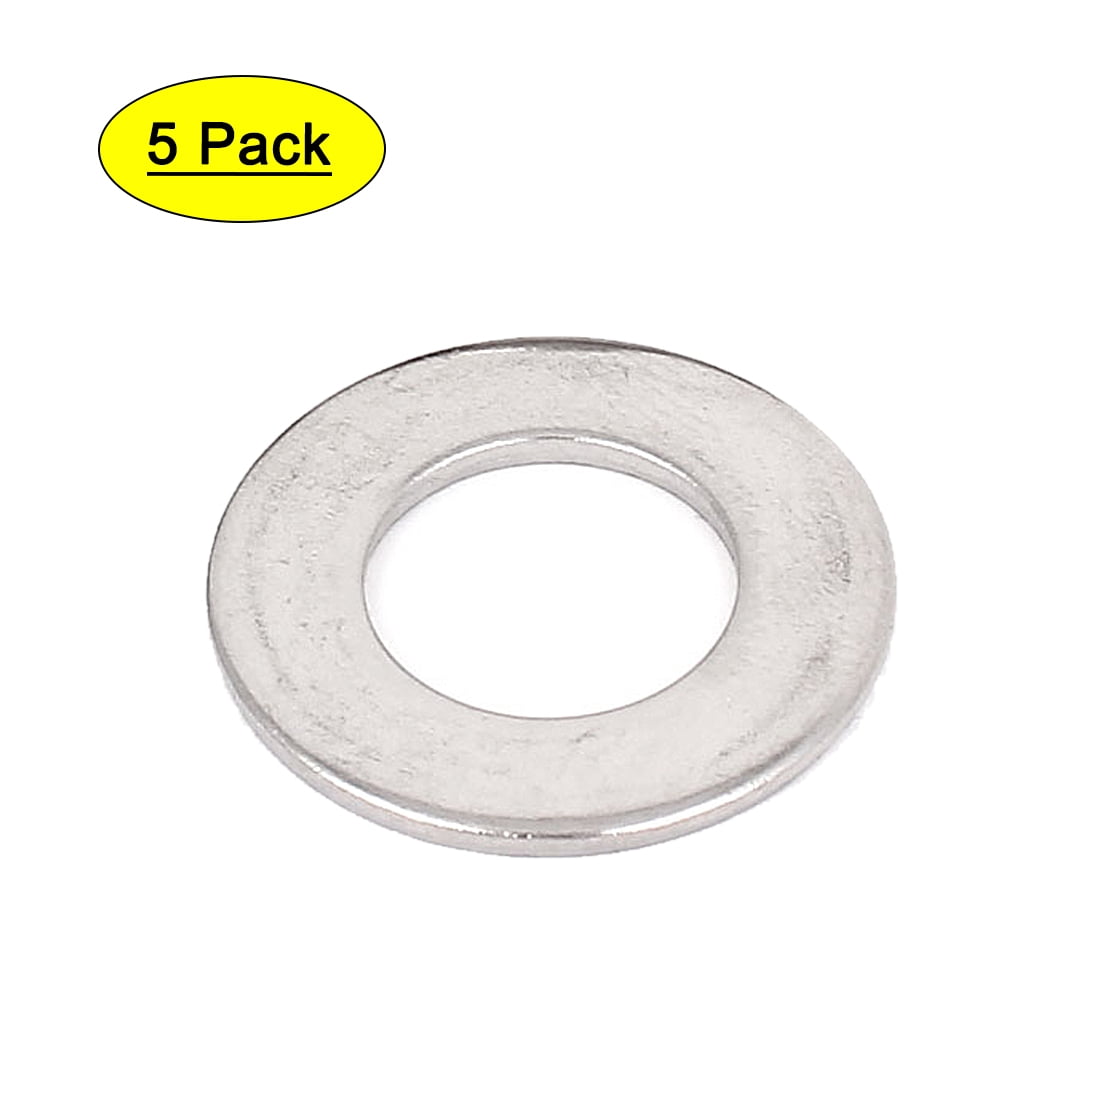 300x Spring Washers Rectangular Section M10 DIY Workshop Tools Accessories